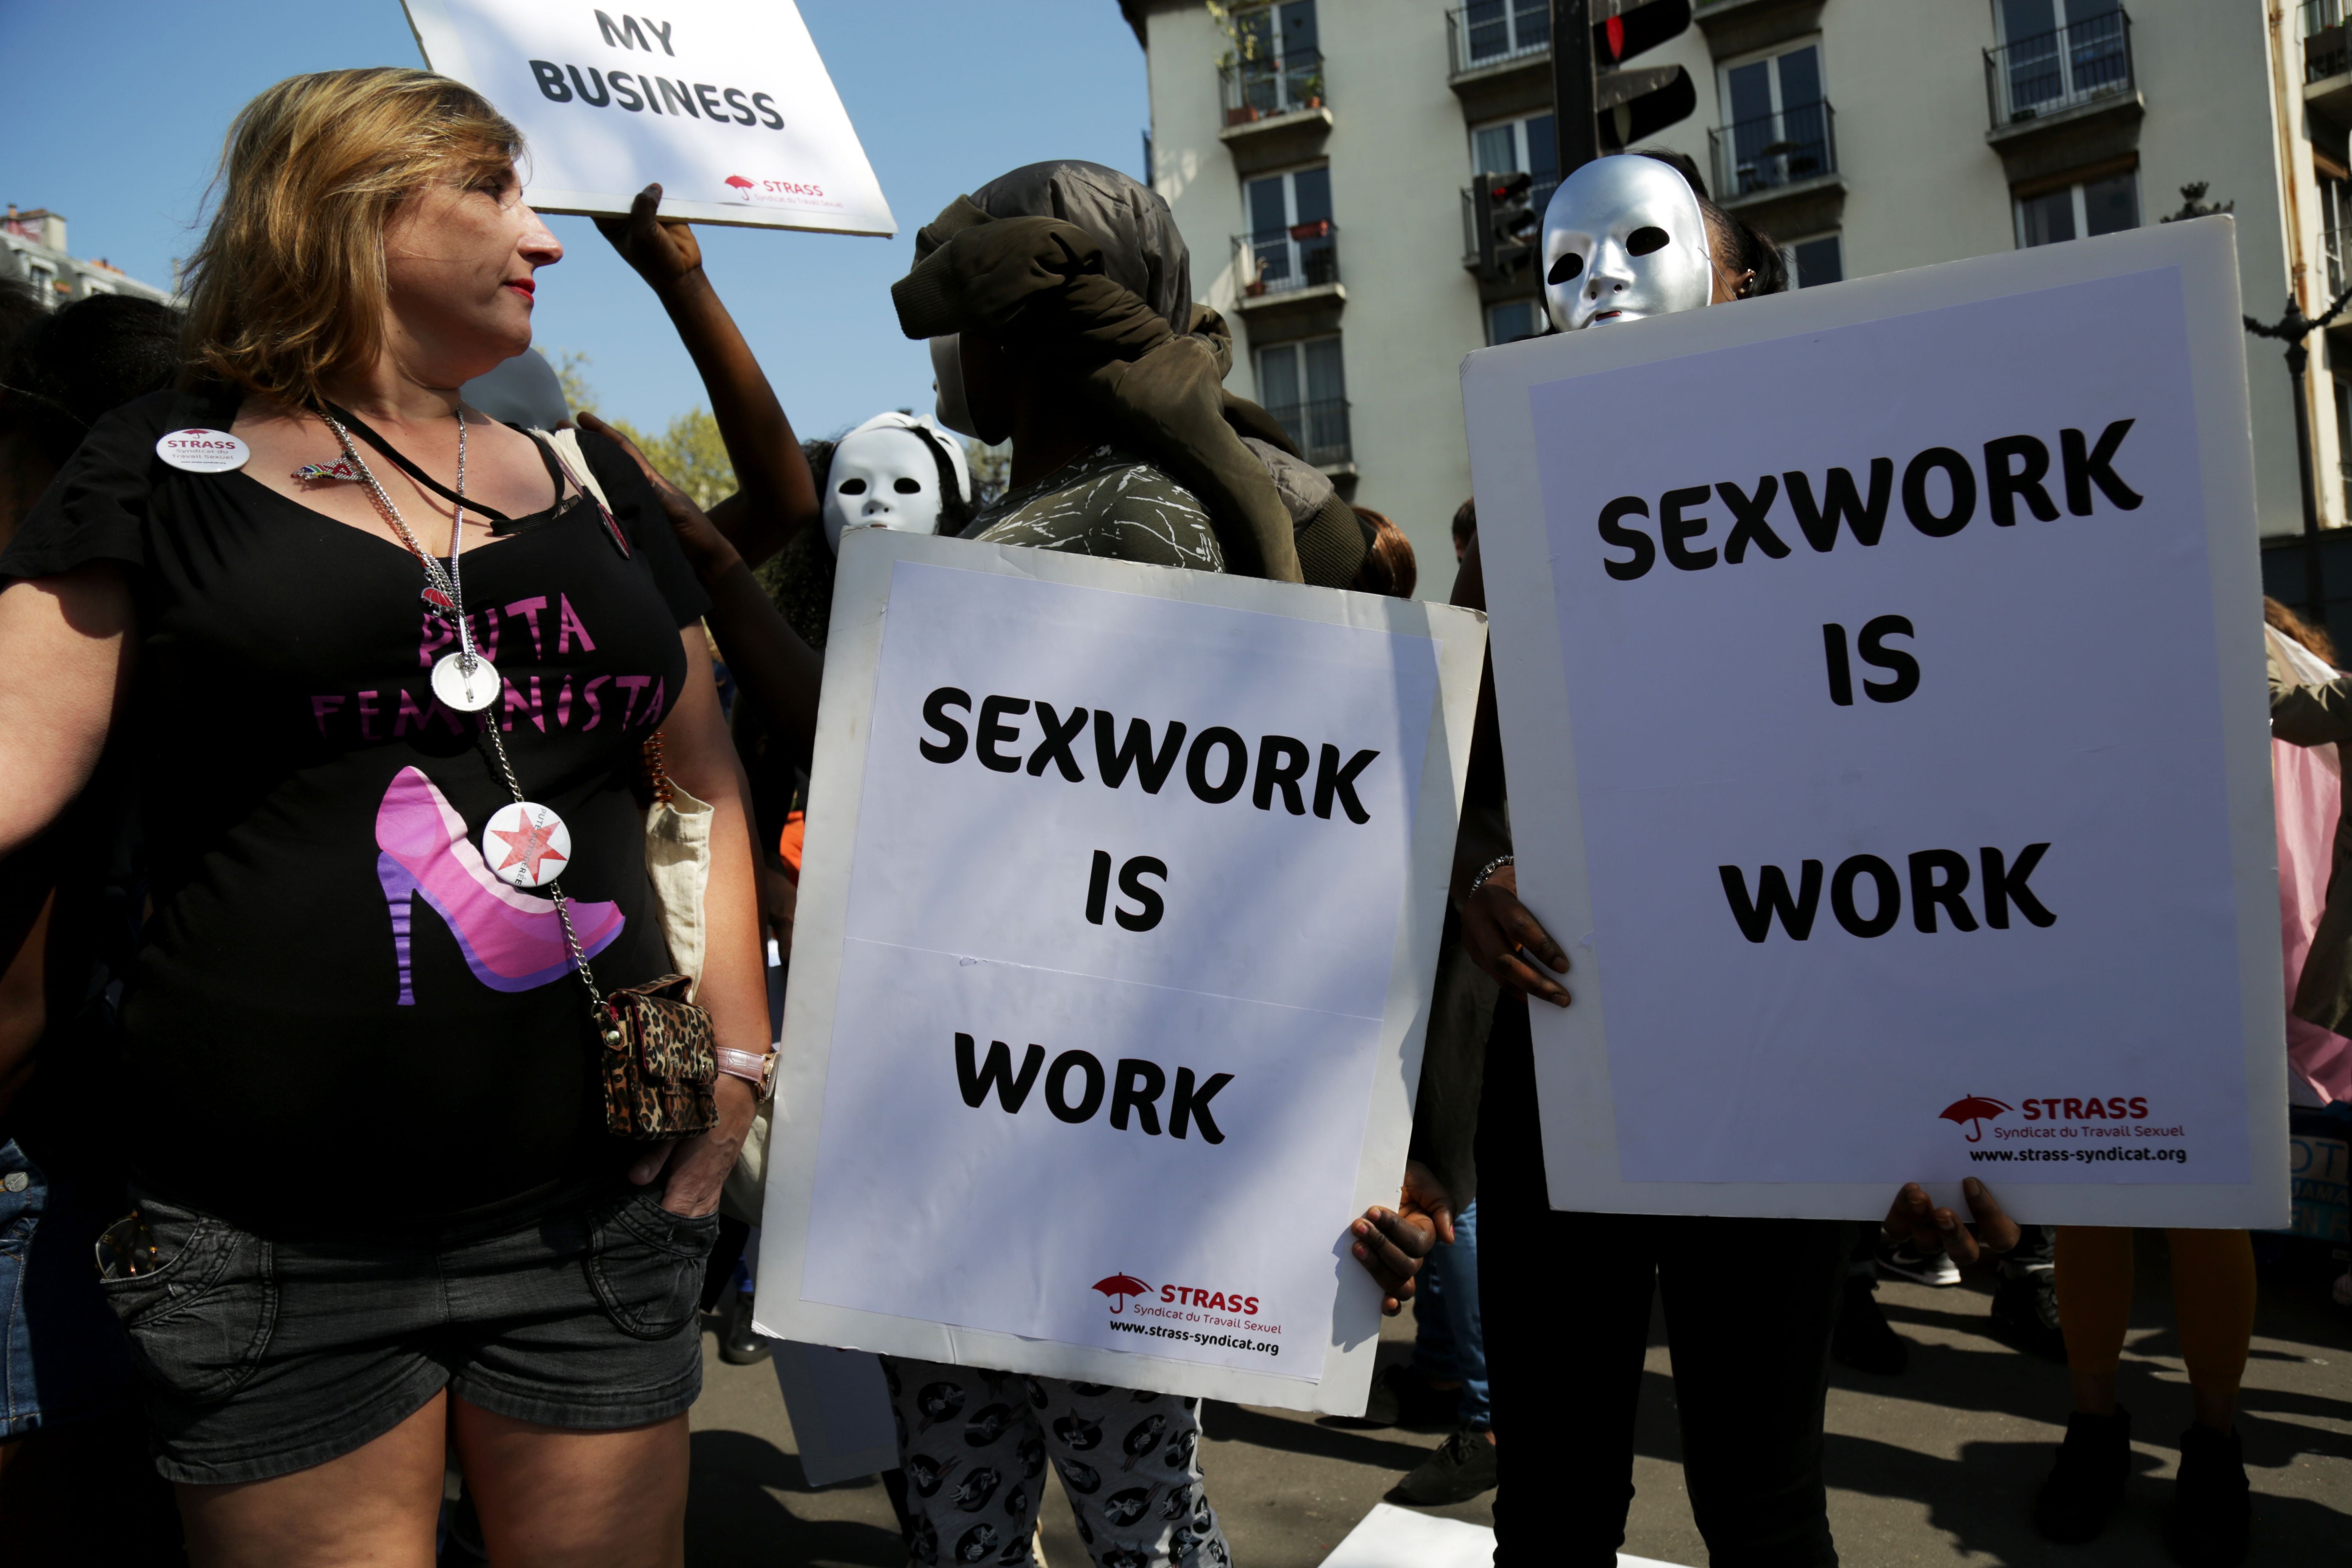 Sex workers aren’t an alien species – they are someone’s daughter, son, mother, partner or friend